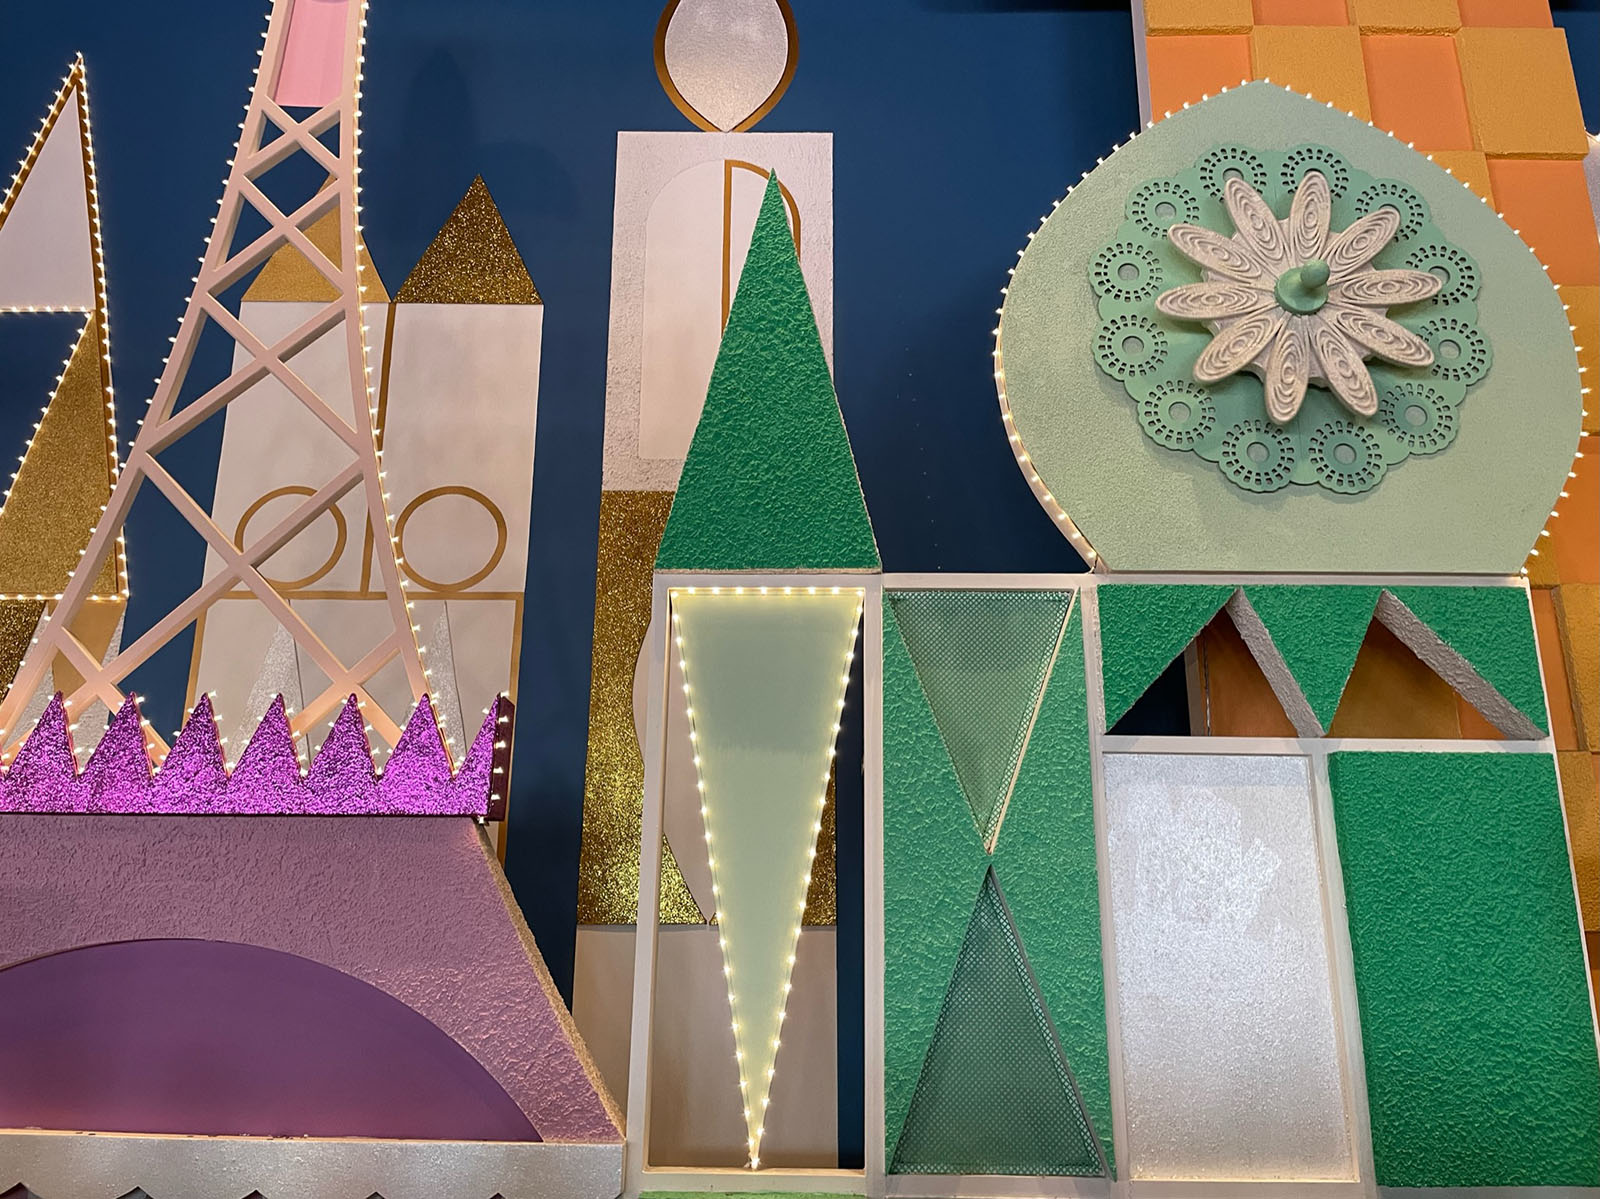 the walls inside It's a Small World, featuring glitter, the eifel tower, and other world monuments